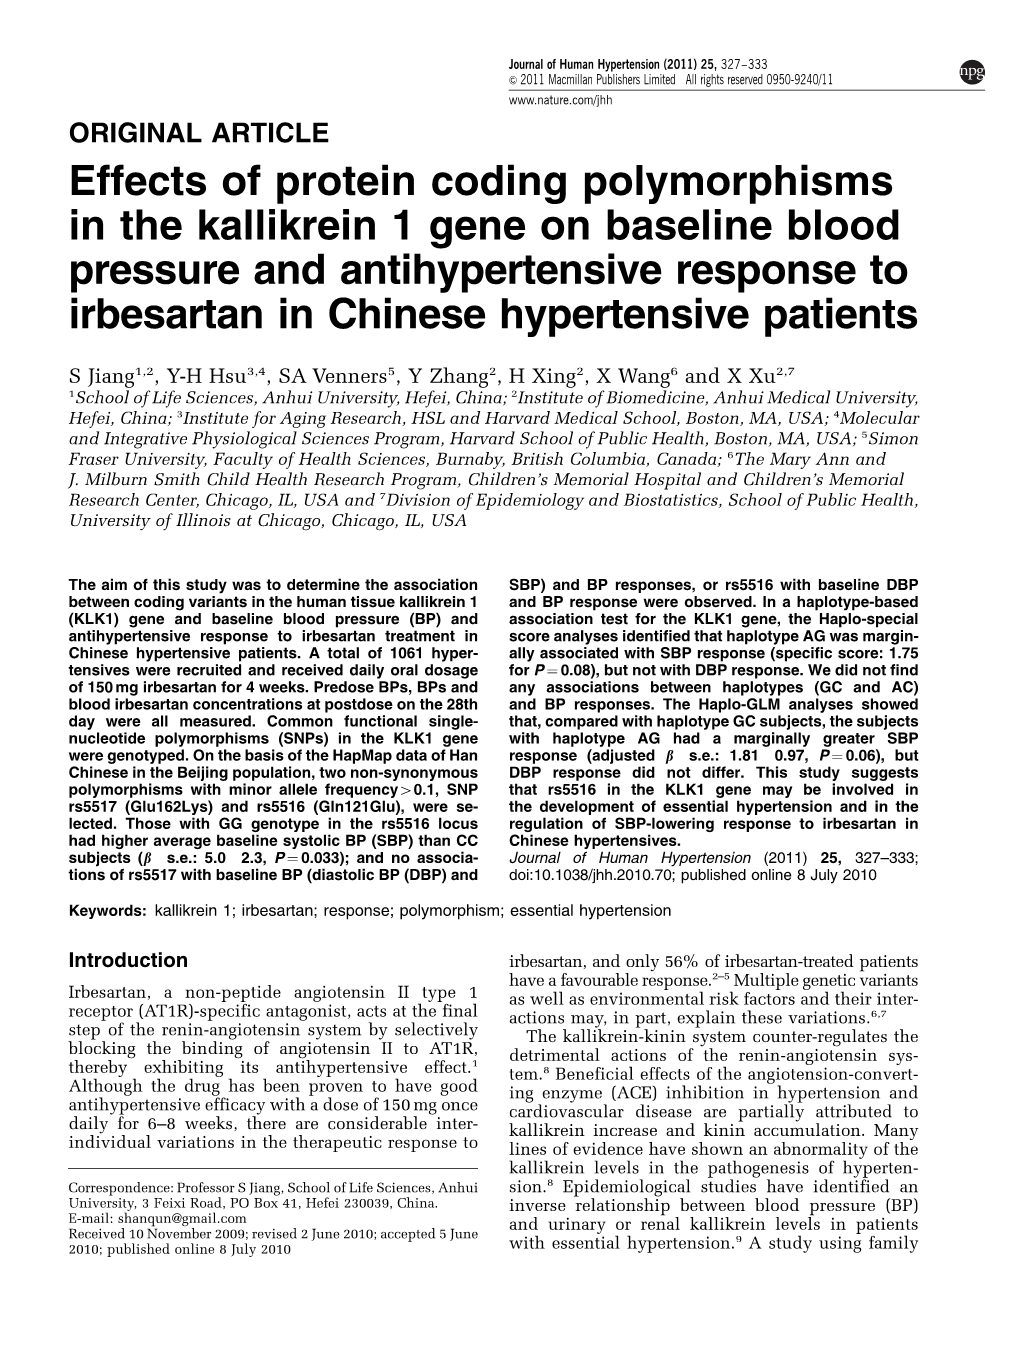 Effects of Protein Coding Polymorphisms in the Kallikrein 1